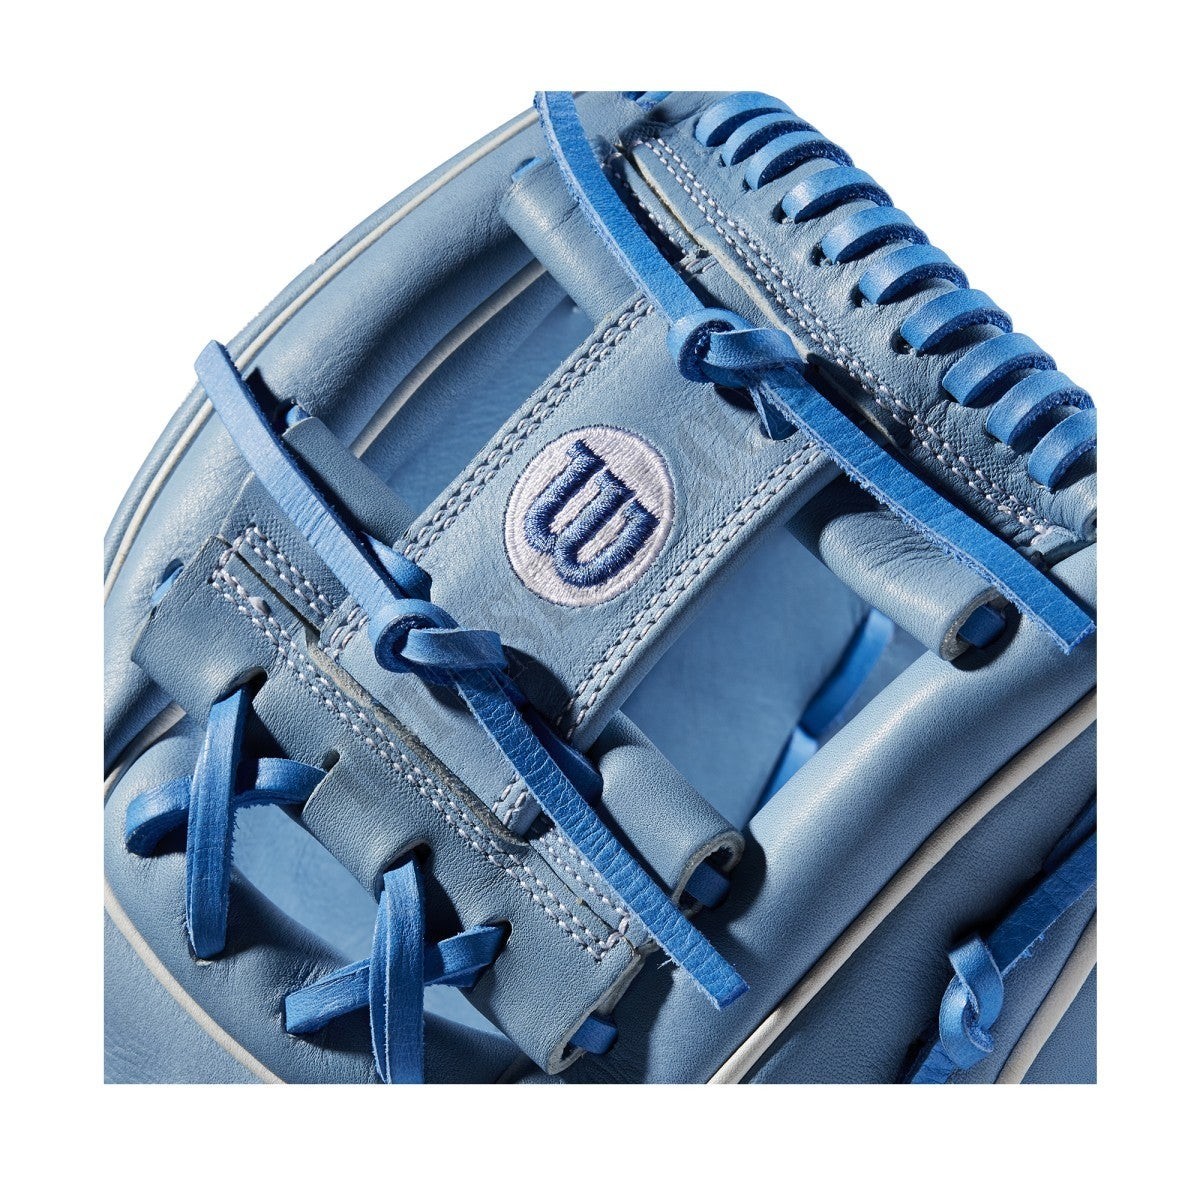 2020 Autism Speaks A2000 1786 11.5" Infield Baseball Glove - Limited Edition ● Wilson Promotions - -5